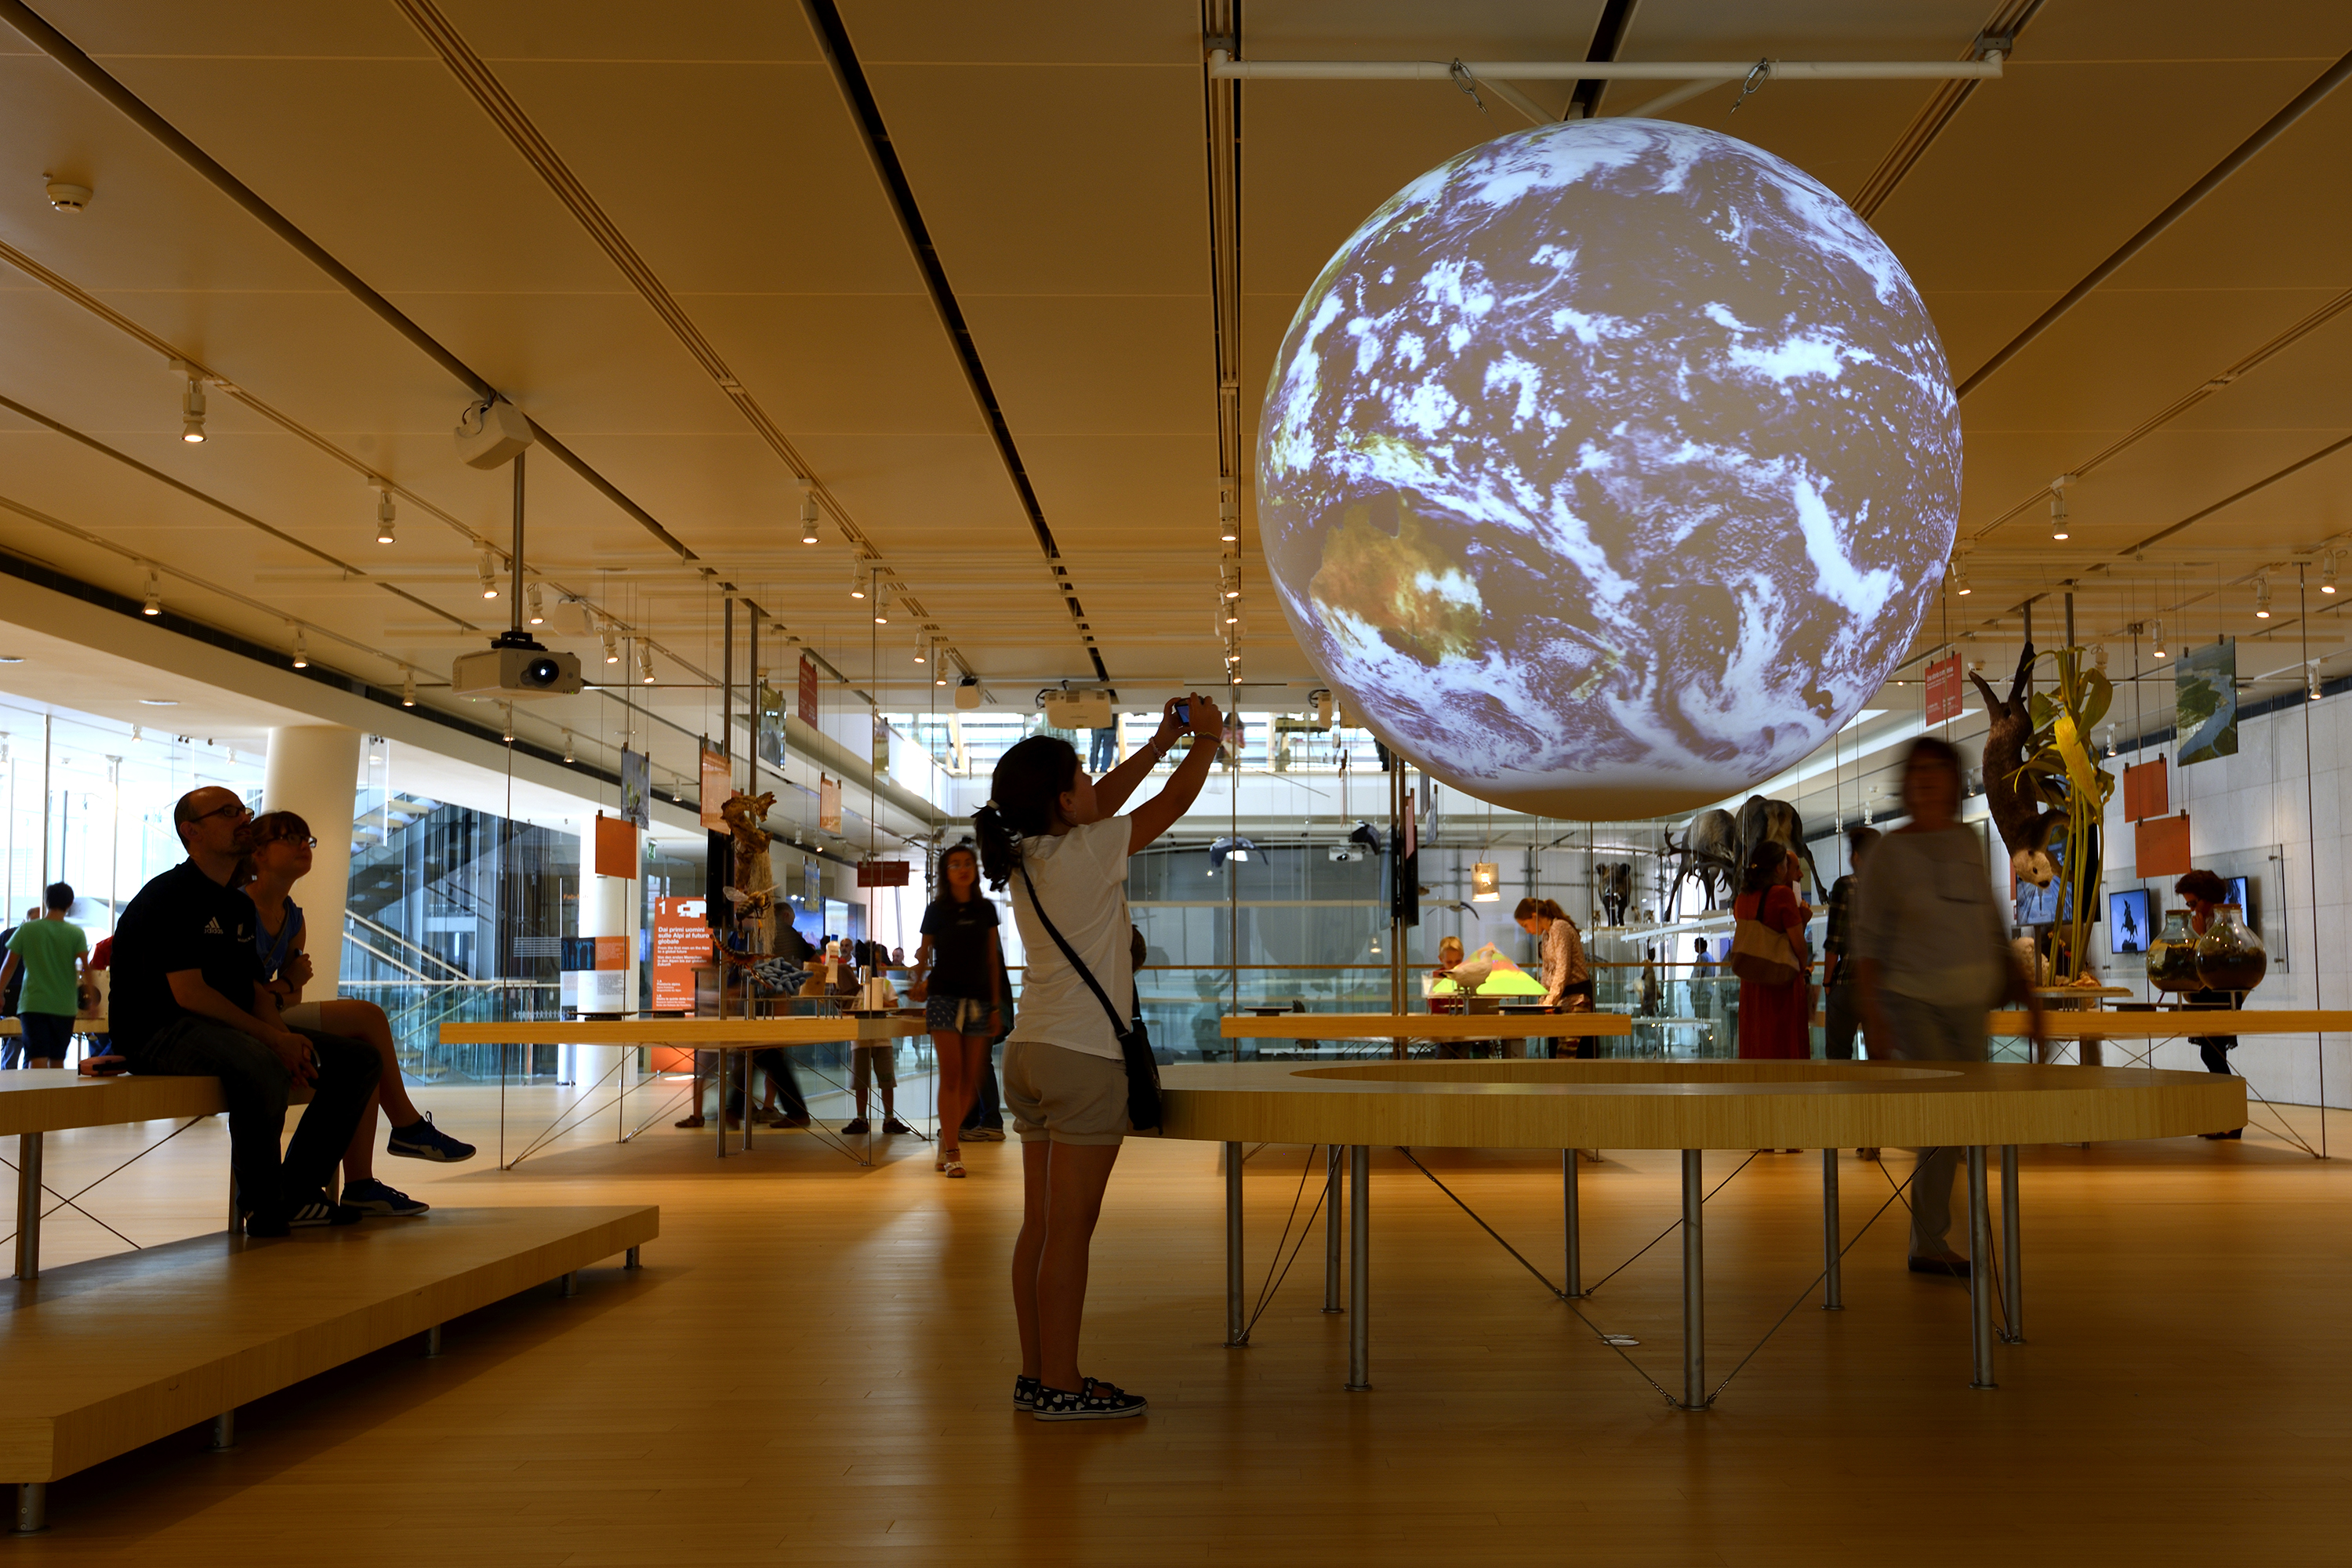 Science On a Sphere displays satellite imagery of Earth in a well-lit room. A visitor leans against the wooden railing surrounding the Sphere and holds out her phone to take a photo. In the background other exhitibts at the museum are visible